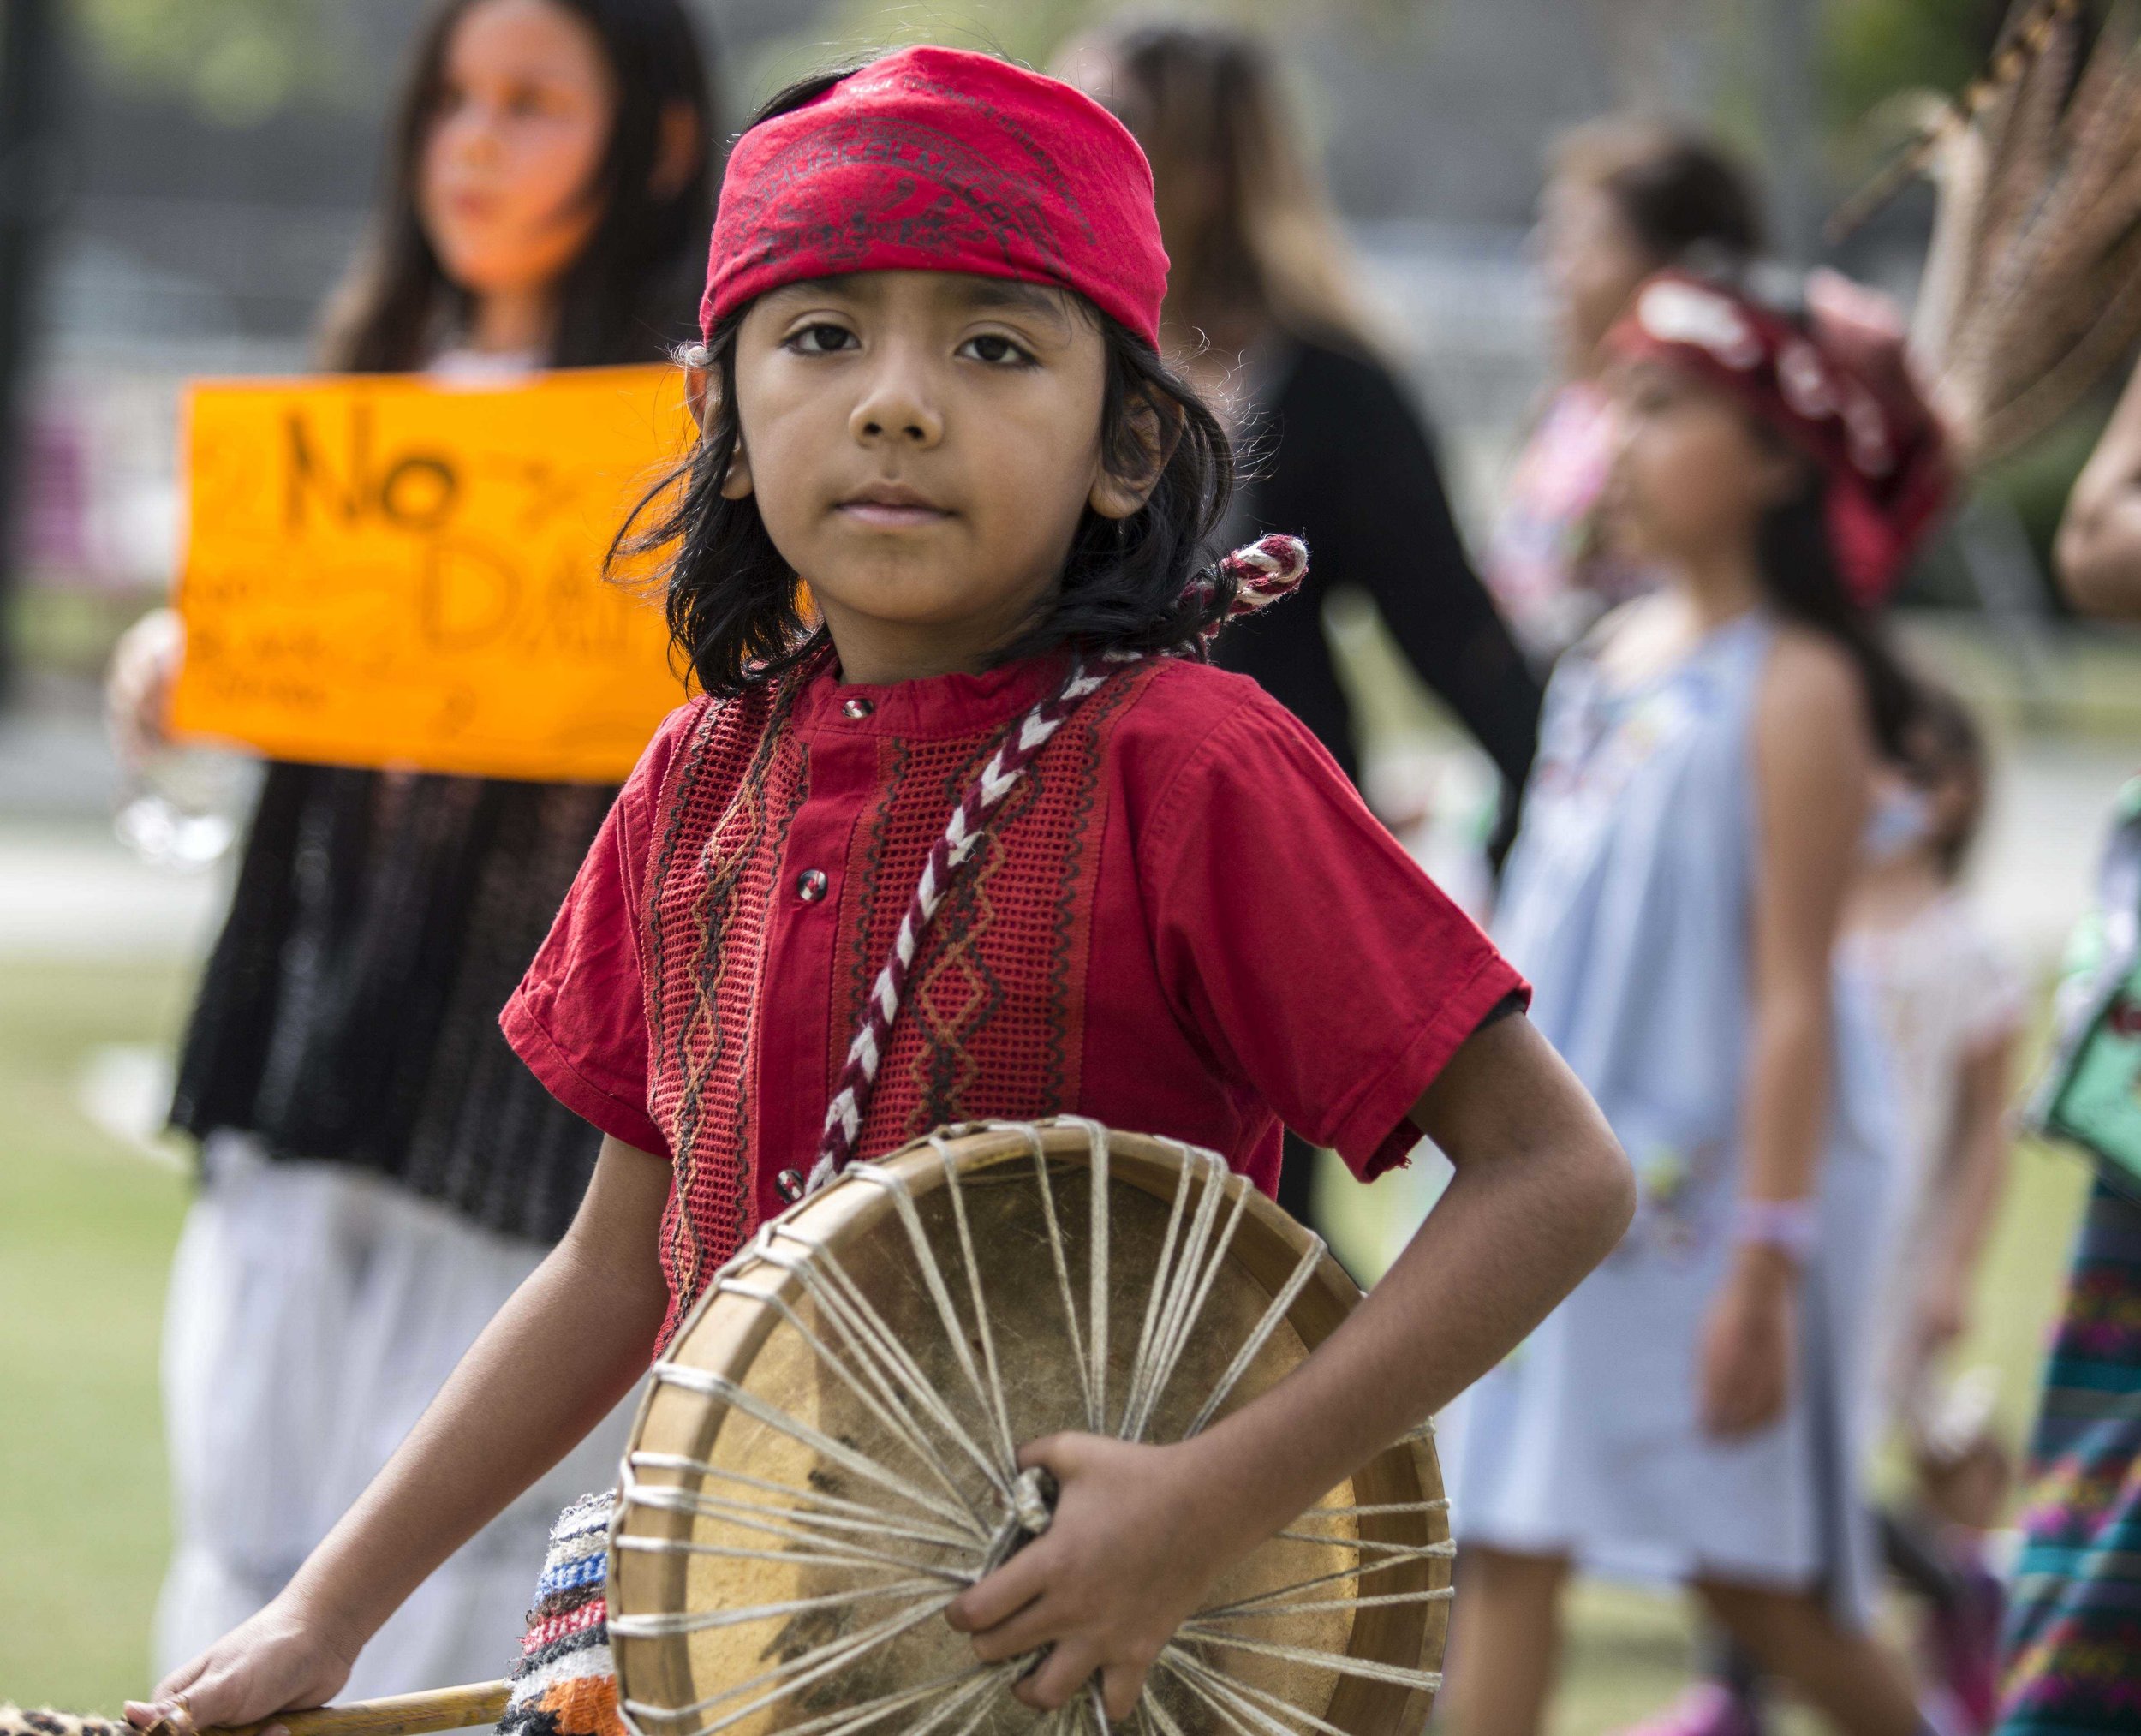  A young activist and “water protector” is photographed arriving at Los Angles City Hall after marching with a coalition of activists and water protectors during the Divest LA march in downtown Los Angles, Calif., on Friday, March 10 2017. (Corsair P